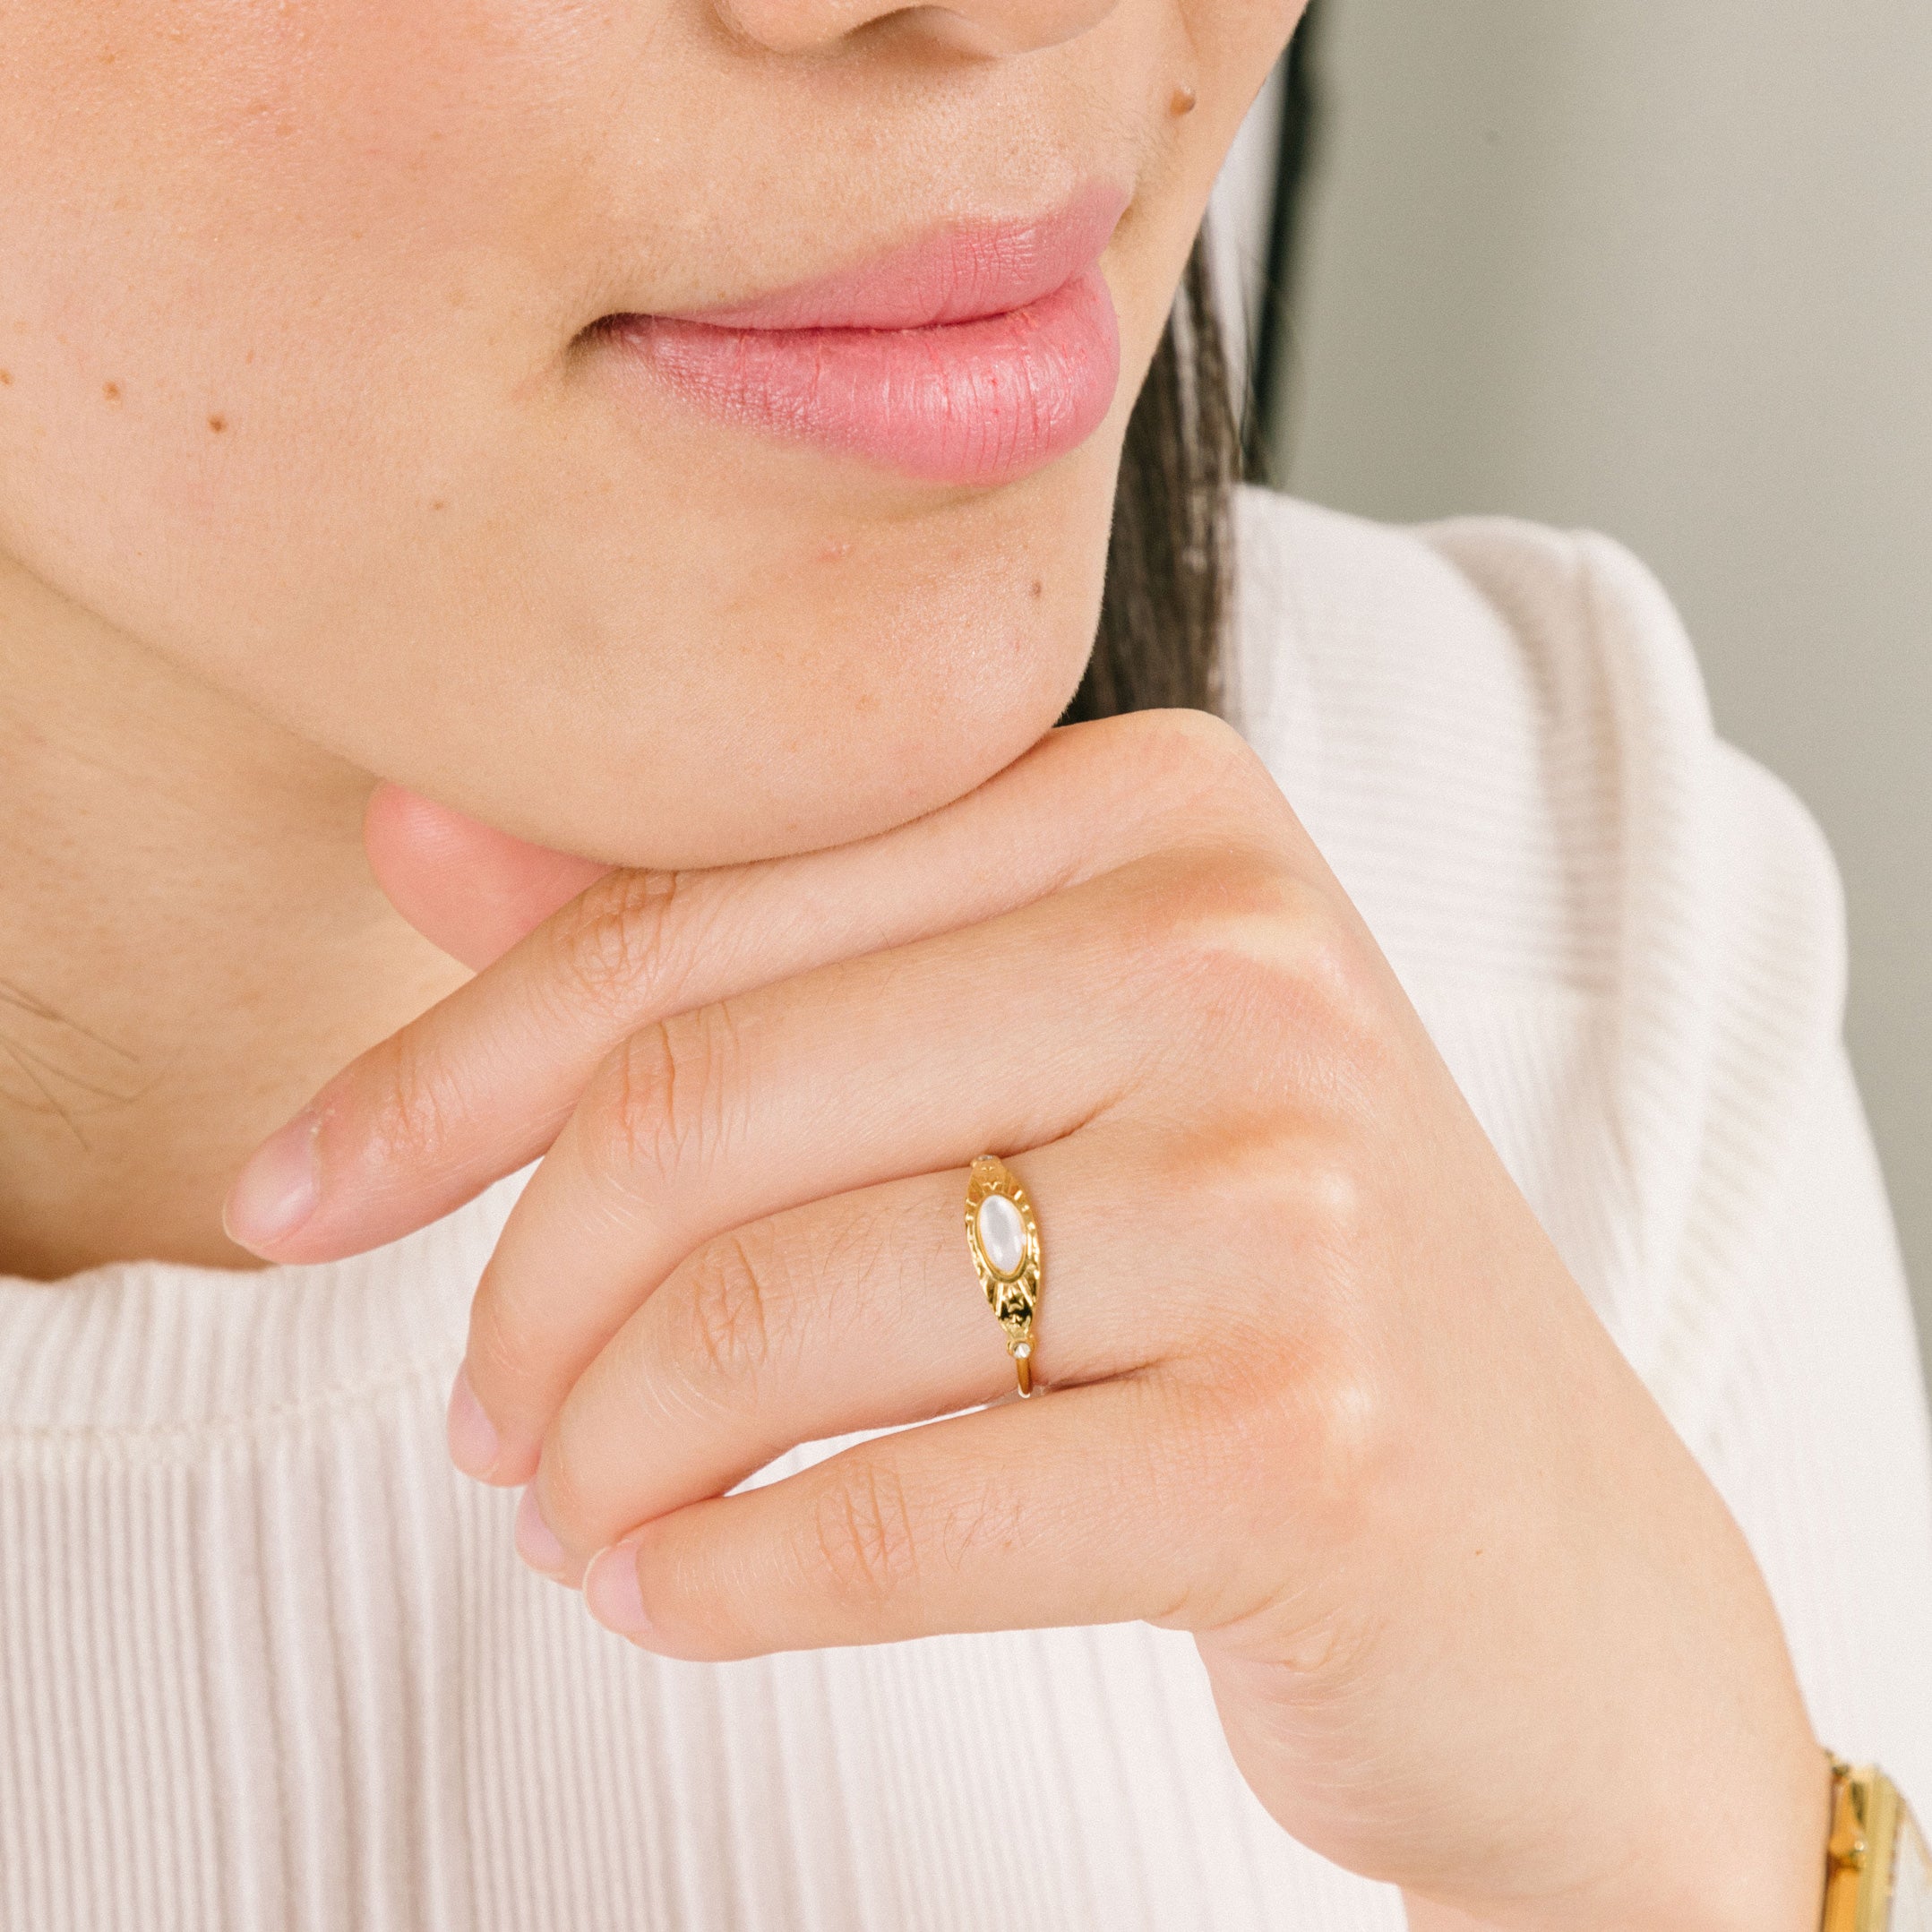 A model wearing the Celestial Ring, adorned with a luminous Mother of Pearl centerpiece and 18K Gold Plated Stainless Steel. A singularly exquisite piece, sure to never fade nor tarnish, and resilient to water.